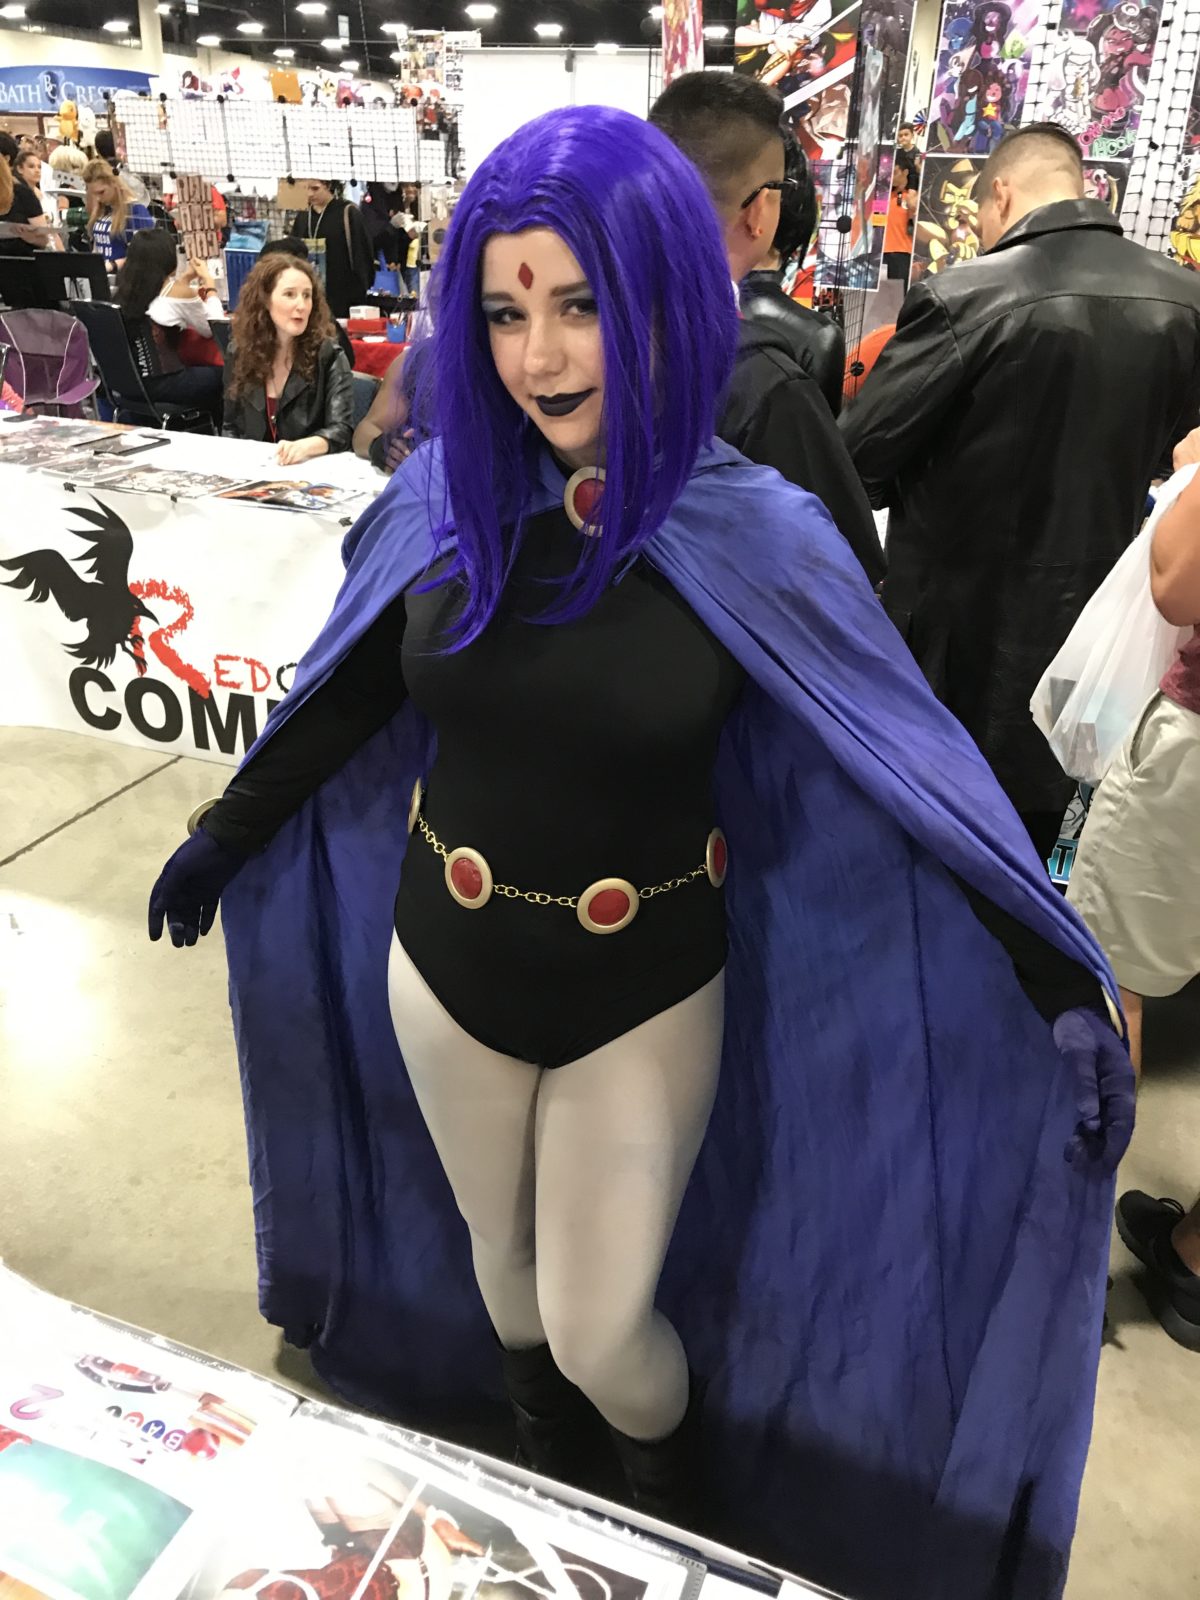 SUPER CosViews from Fort Lauderdale SUPERCON:  @Lady_Luana_ was our Fav Raven at Fort Lauderdale